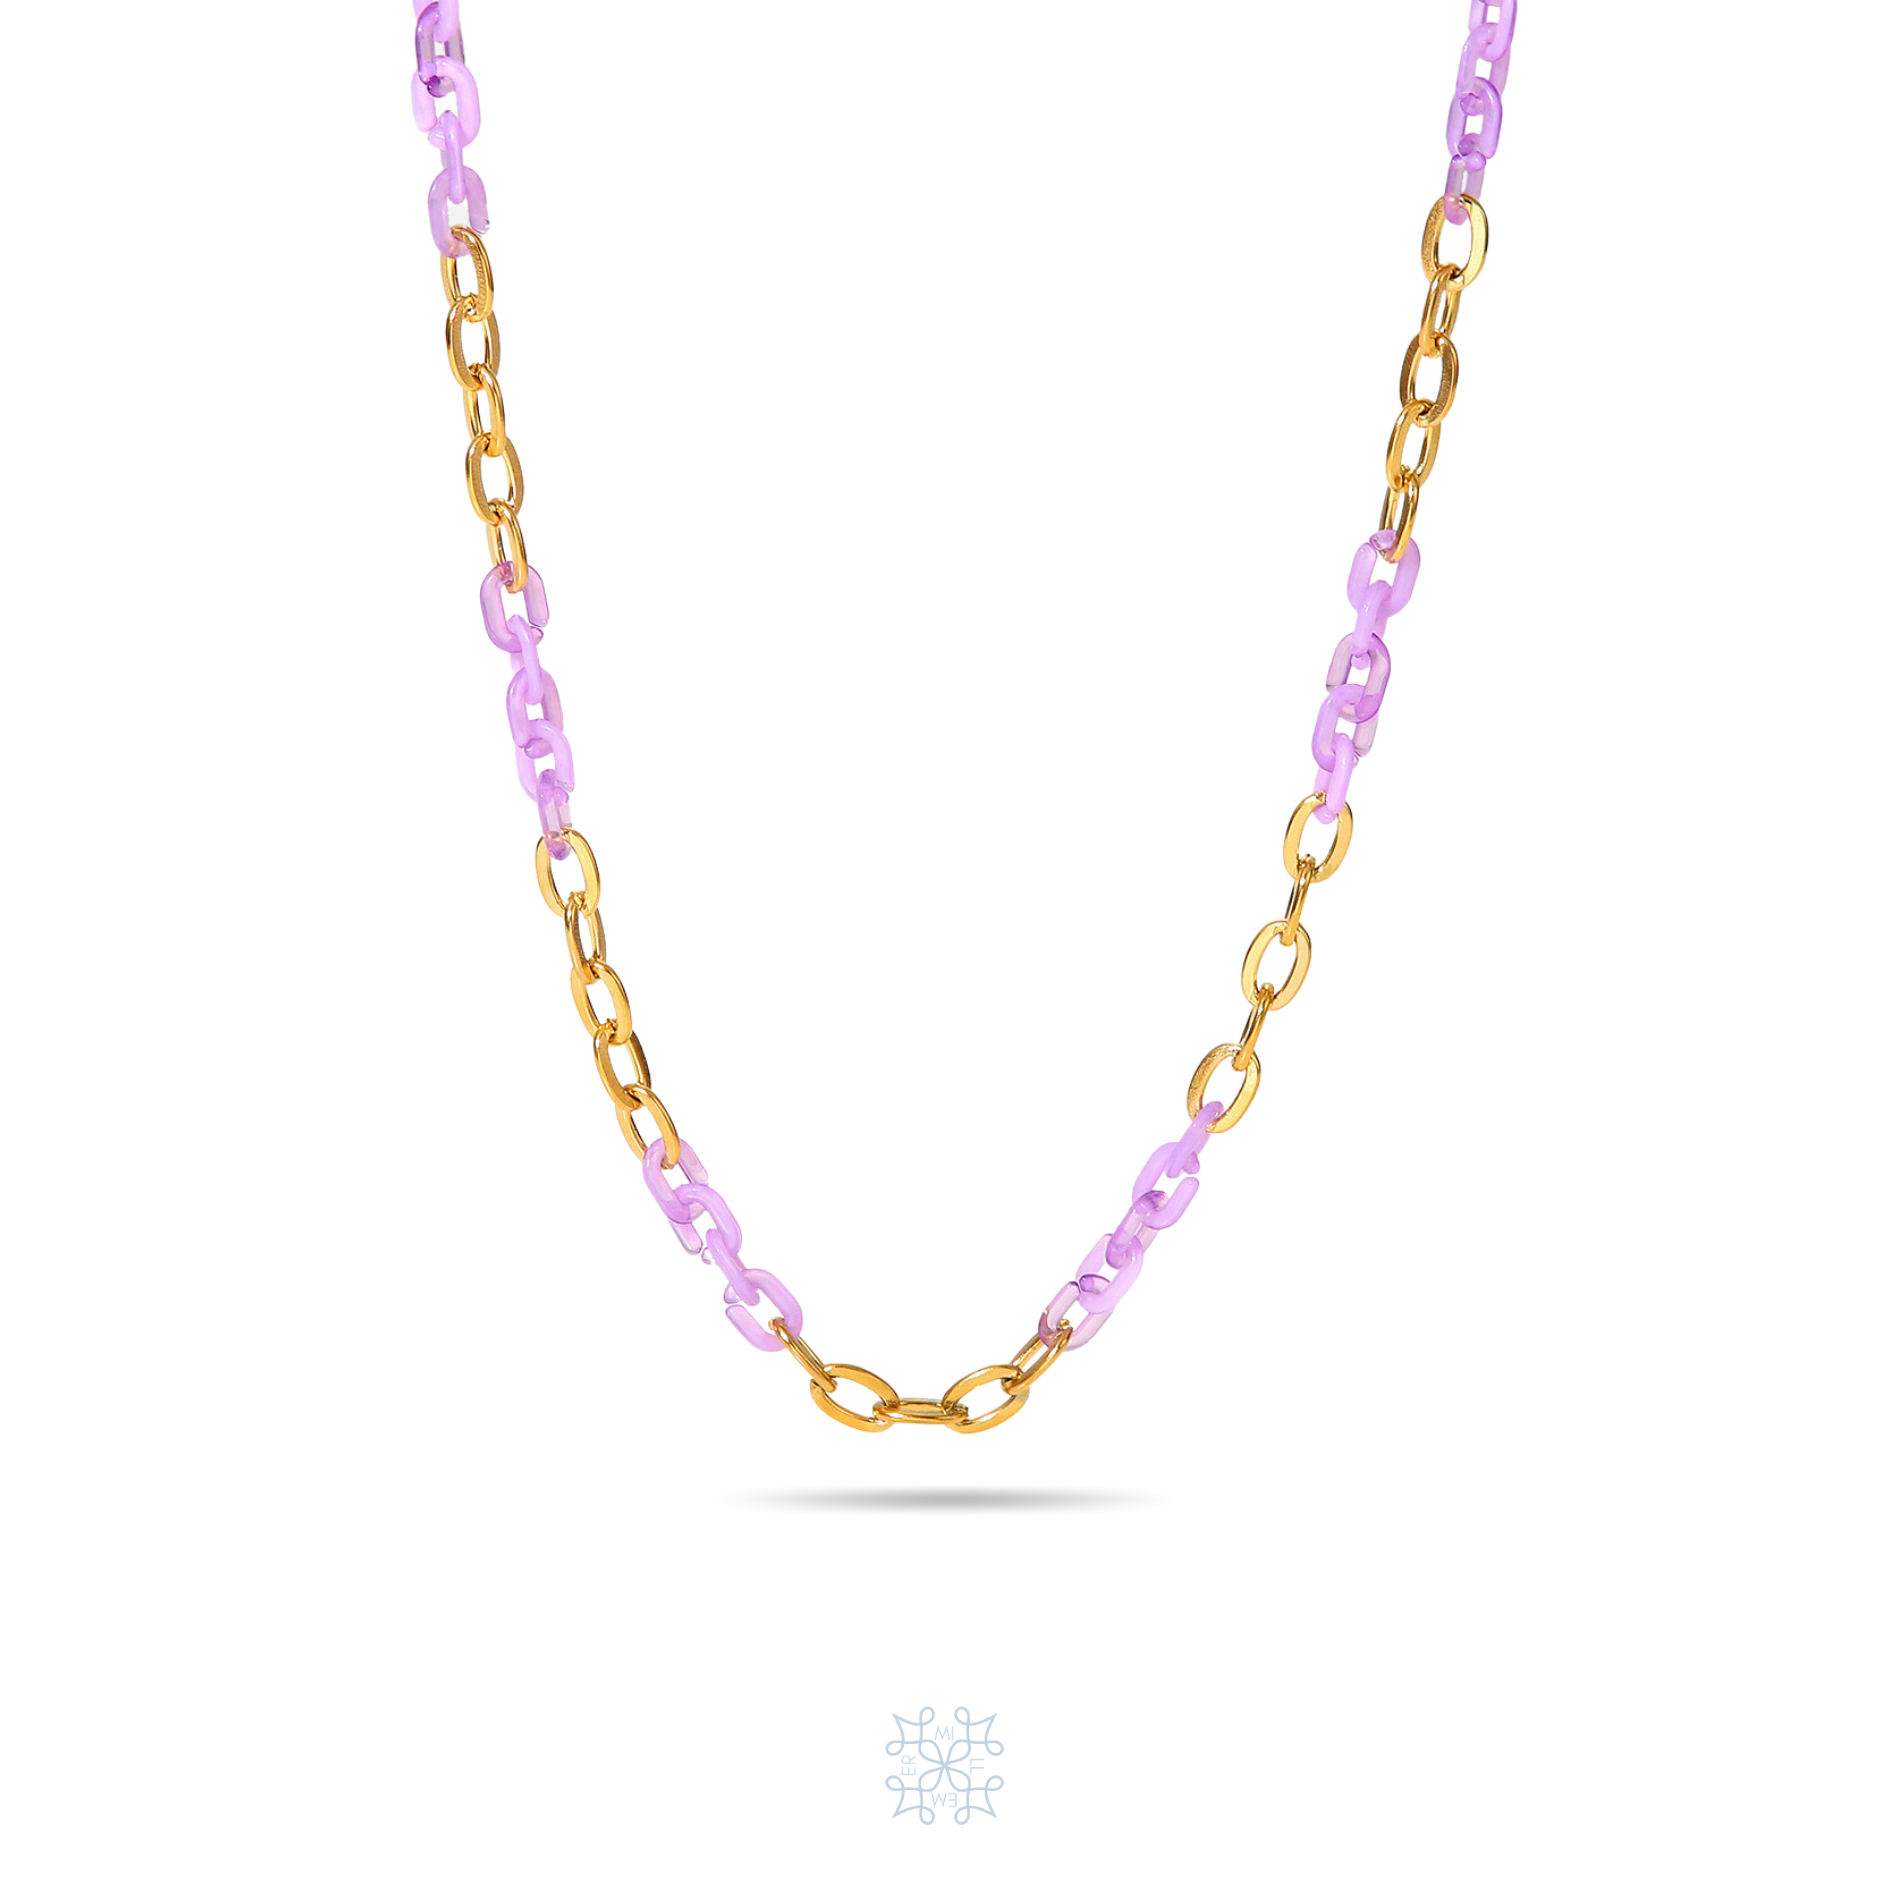 Gold plated chain necklace. The chain is composed by lilac chain parts and gold chain parts